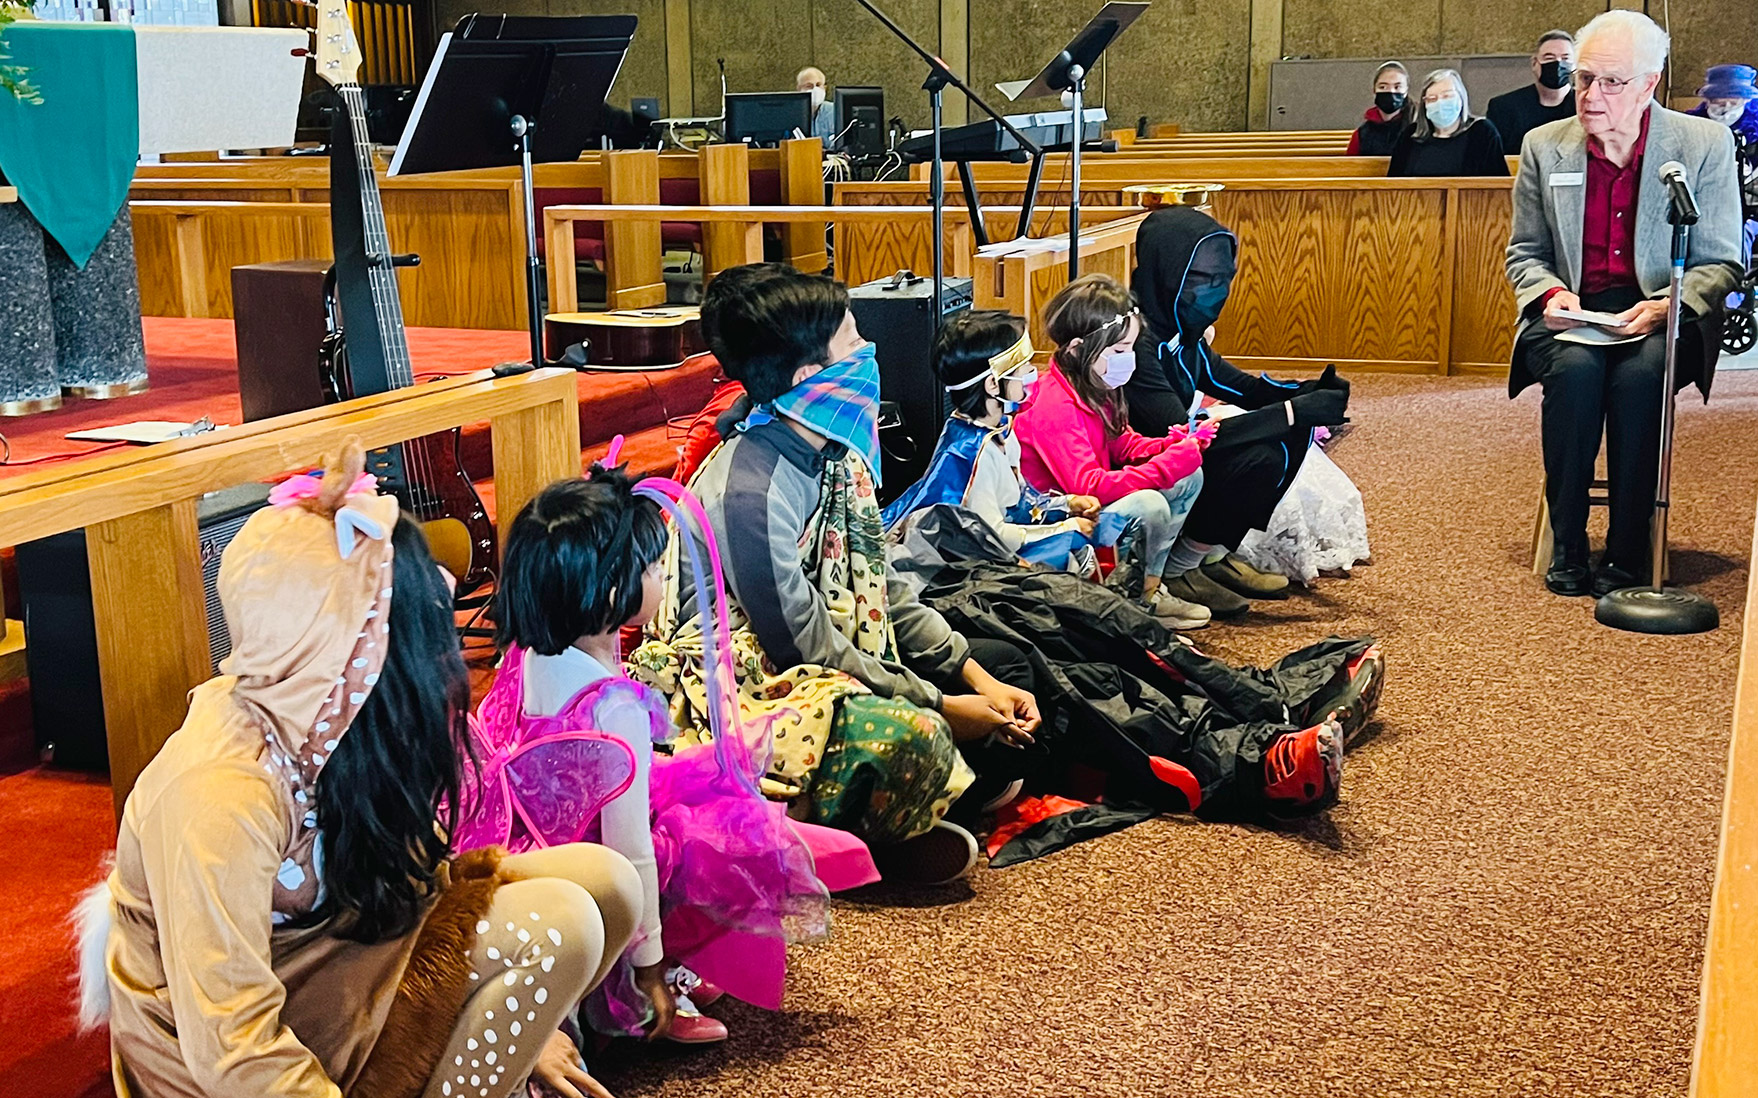 children in costume sitting at the front of the sanctuary during worship